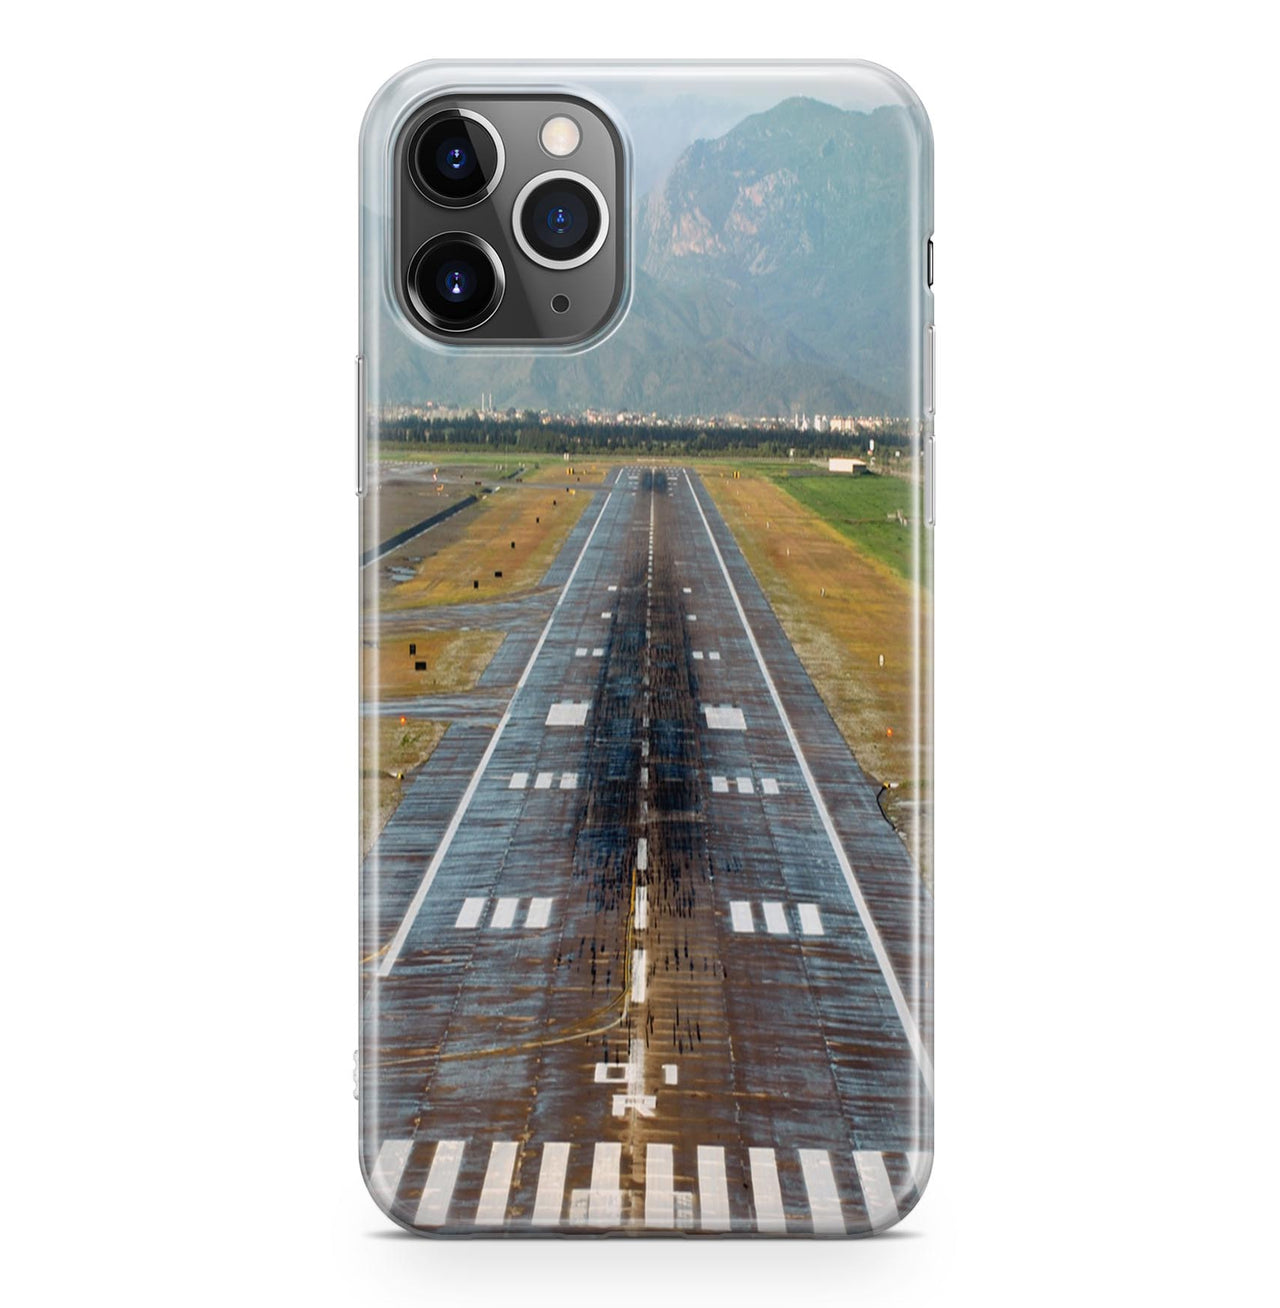 Amazing Mountain View & Runway Designed iPhone Cases